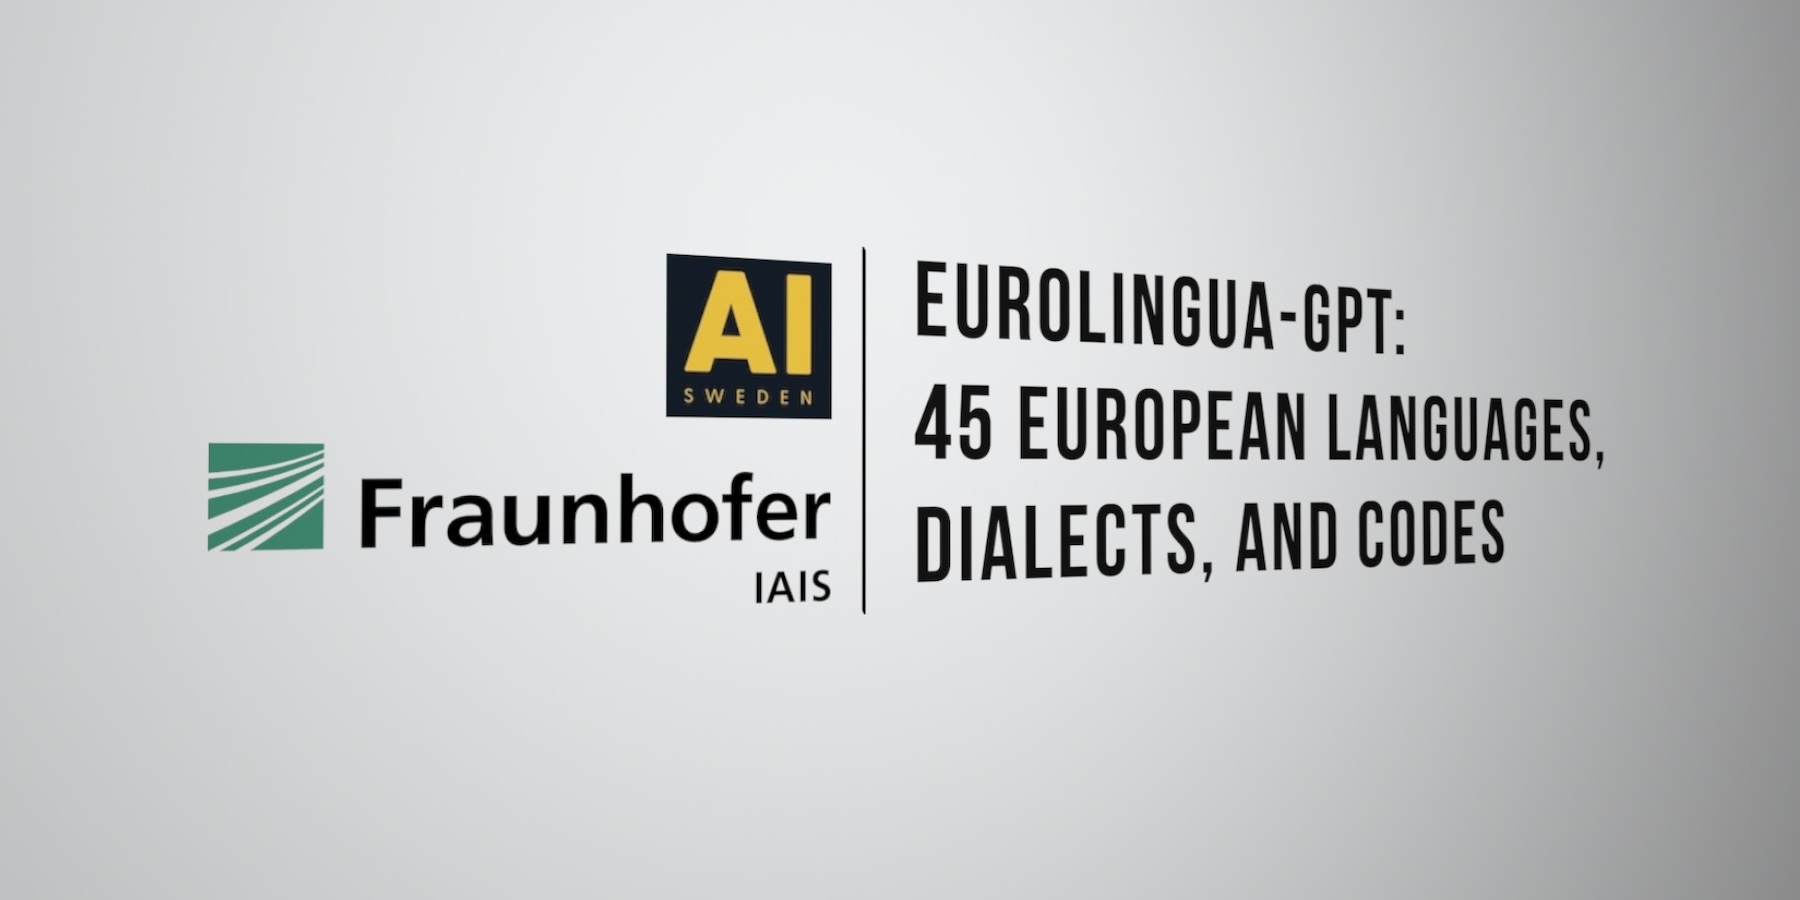 AI Sweden and Fraunhofer logos with the title "Eurolingua-GPT: 45 European Languages, dialects and codes"